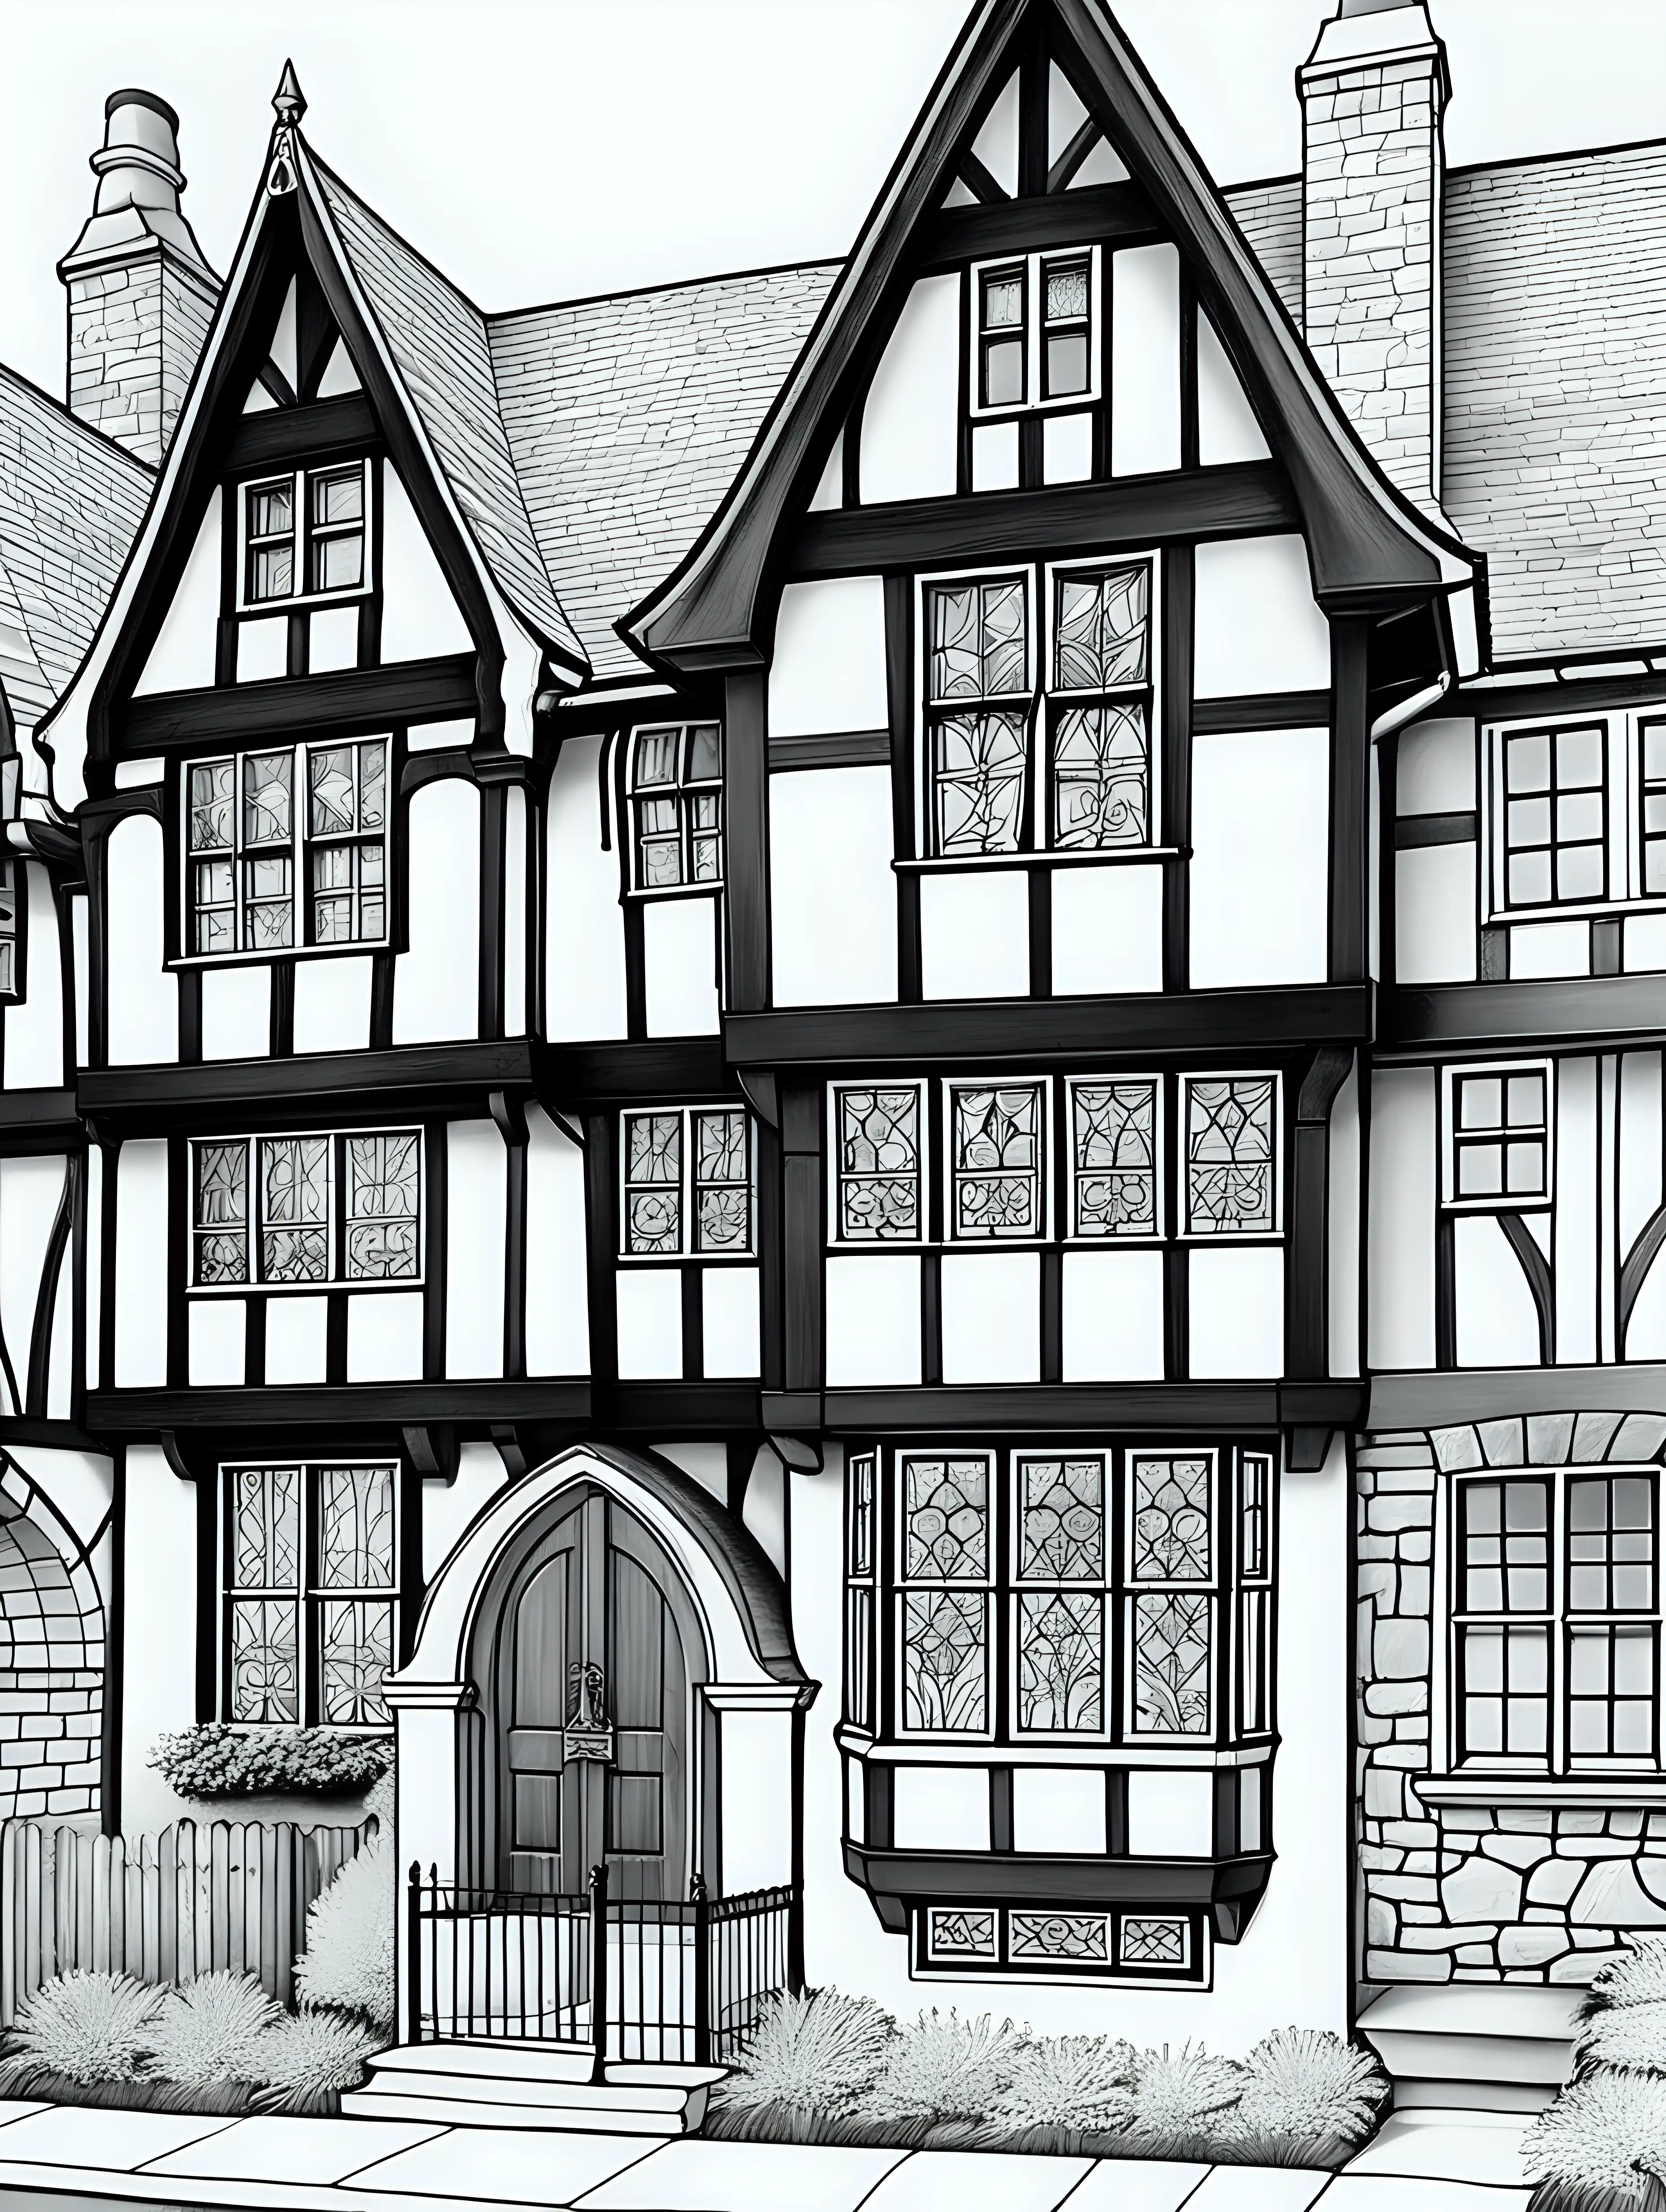 A Coloring book page, black and white. Tudor-style townhouses with exposed beams and charming leaded glass windows. The lines should be bold and inviting for young children